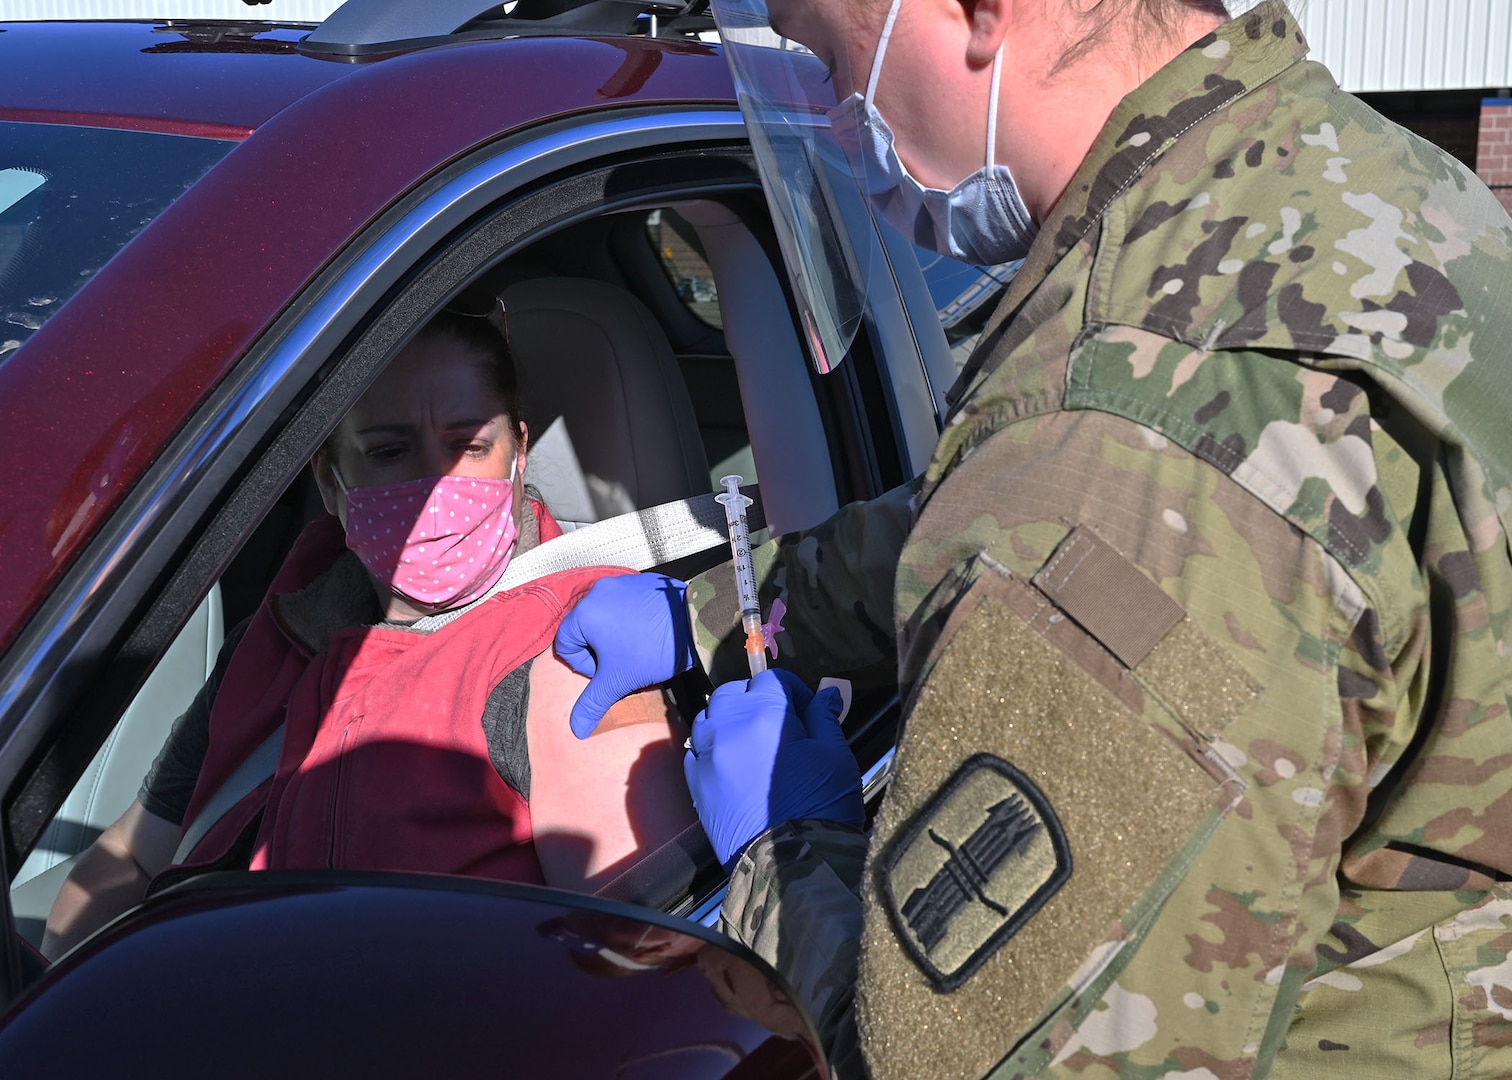 Spc. Madalyn Stella, combat medic, 197th Field Artillery Brigade, NHARNG, applies a bandage after vaccinating Stacy Gillis, a civilian paramedic, Dec. 29 in Exeter, N.H